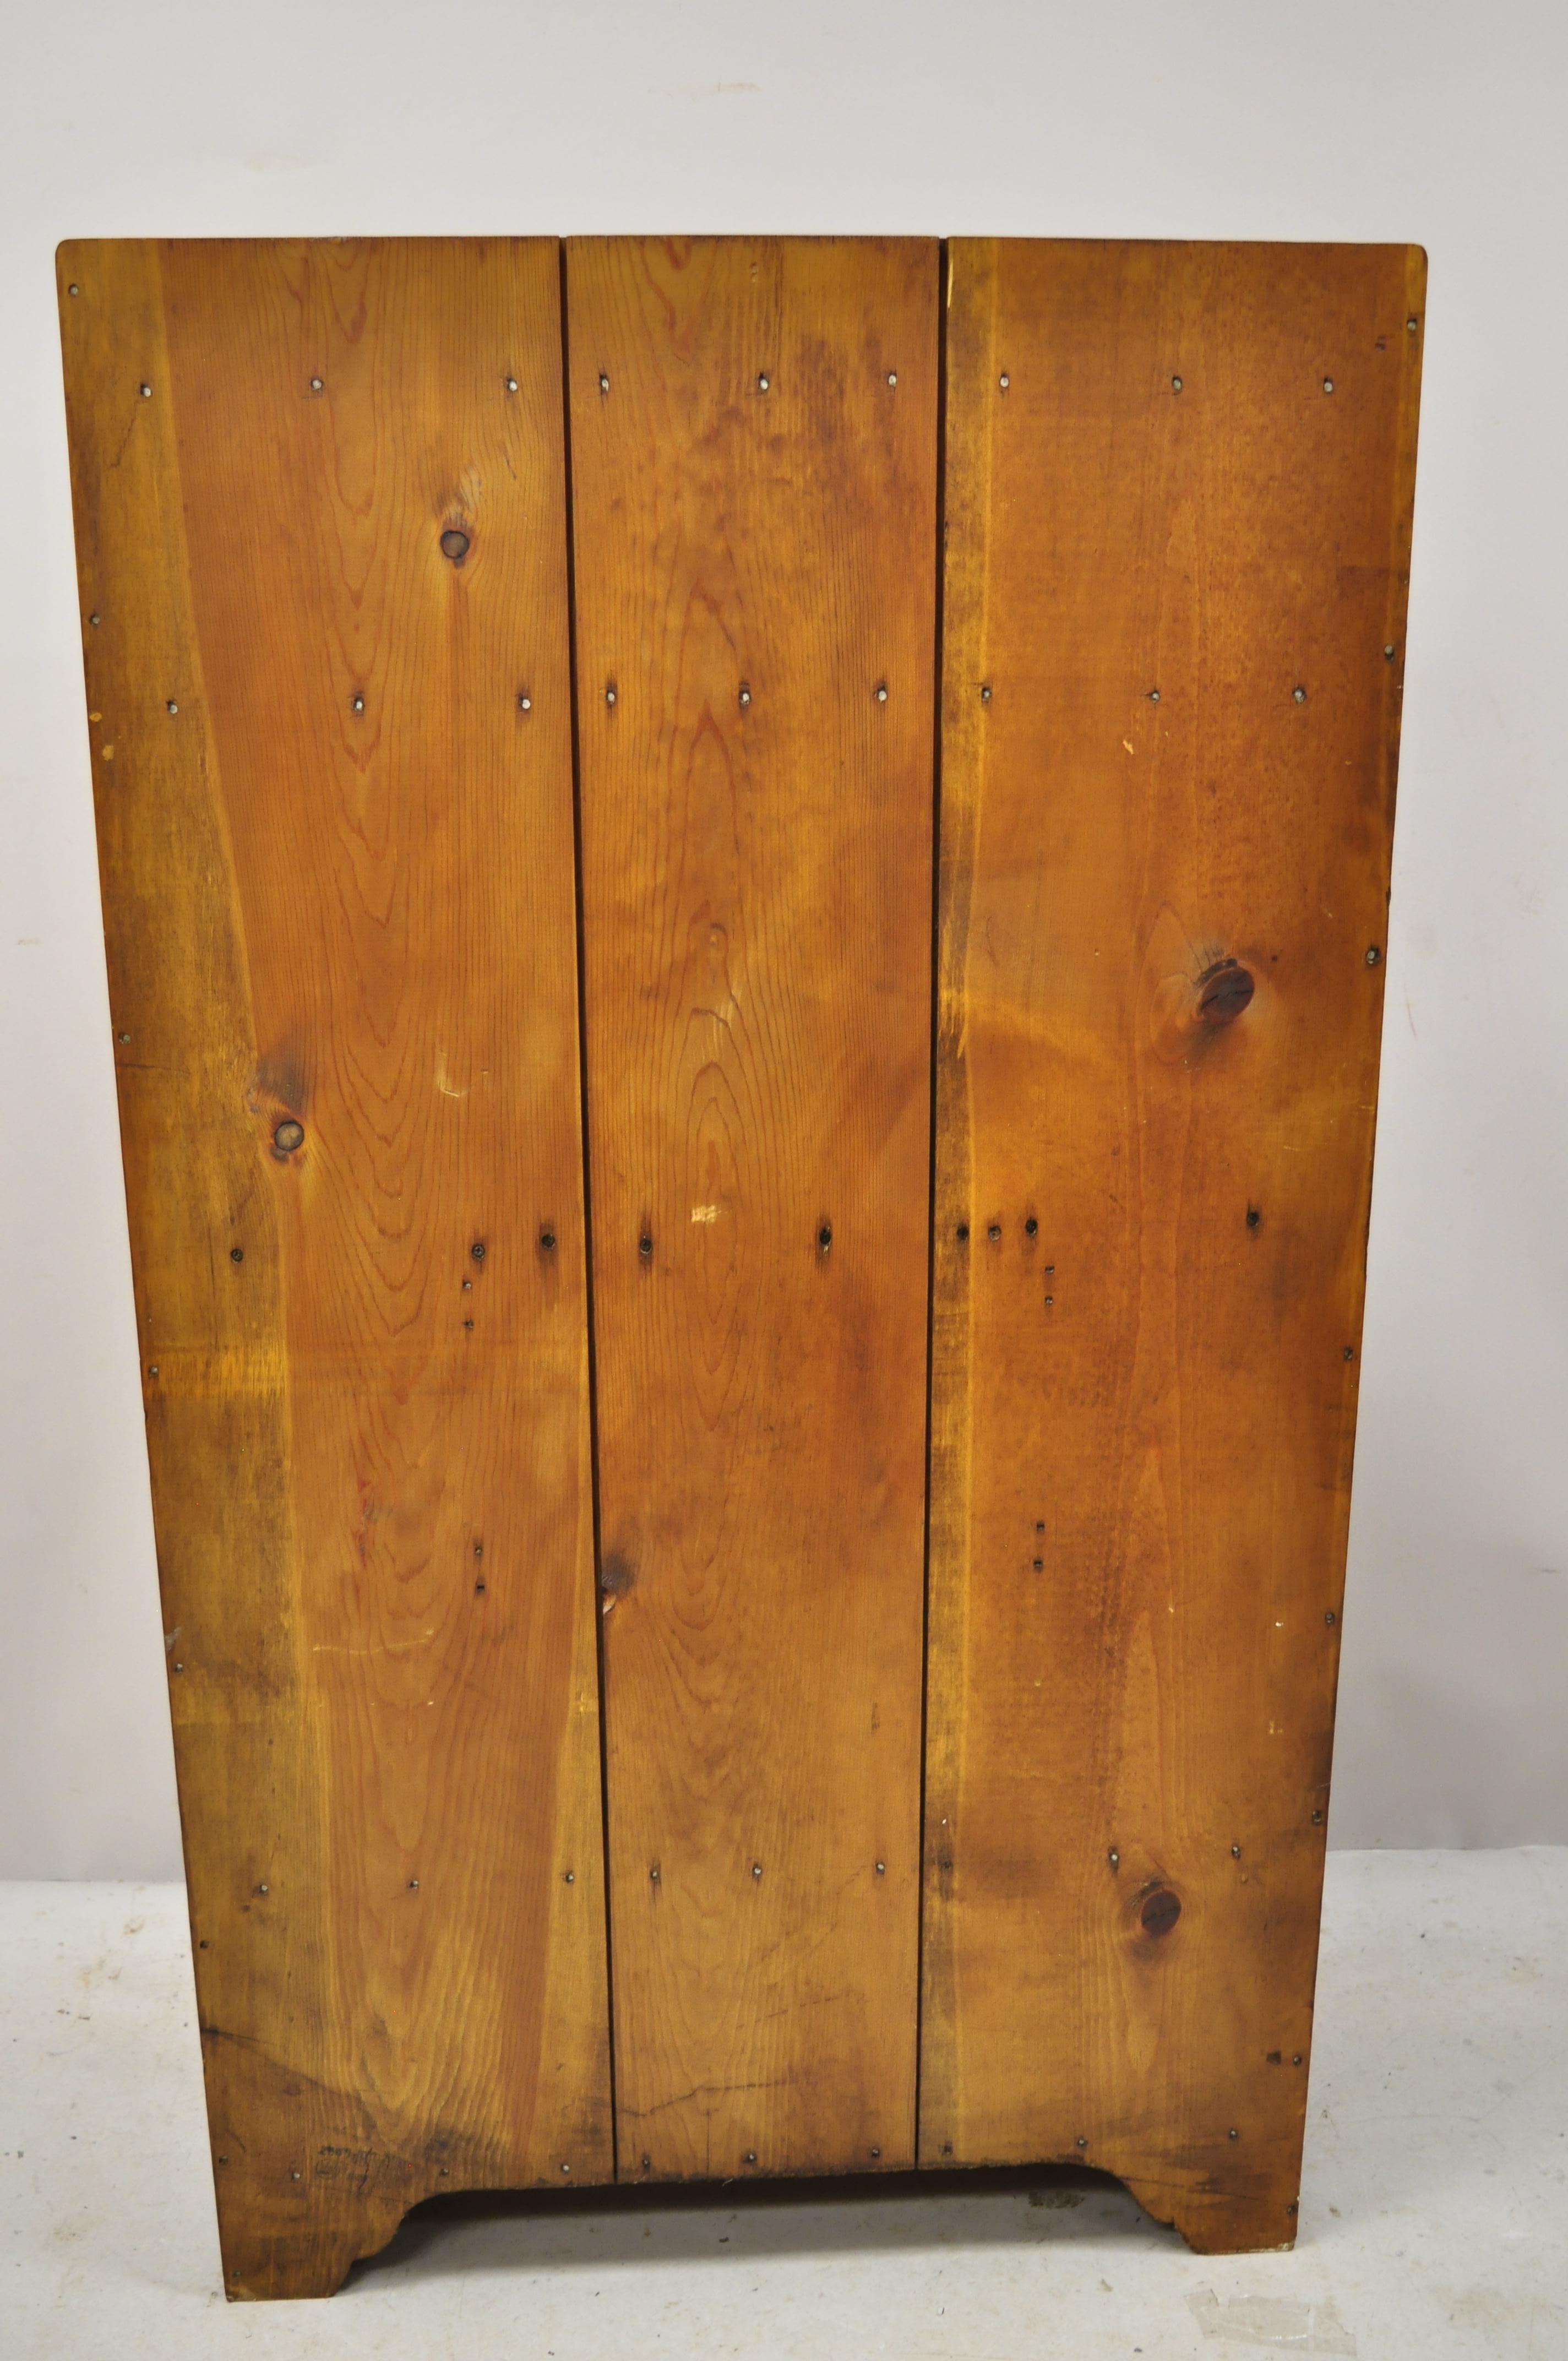 Antique Pine Wood Step Back Childs Size Small Colonial Hutch Cupboard Cabinet 2